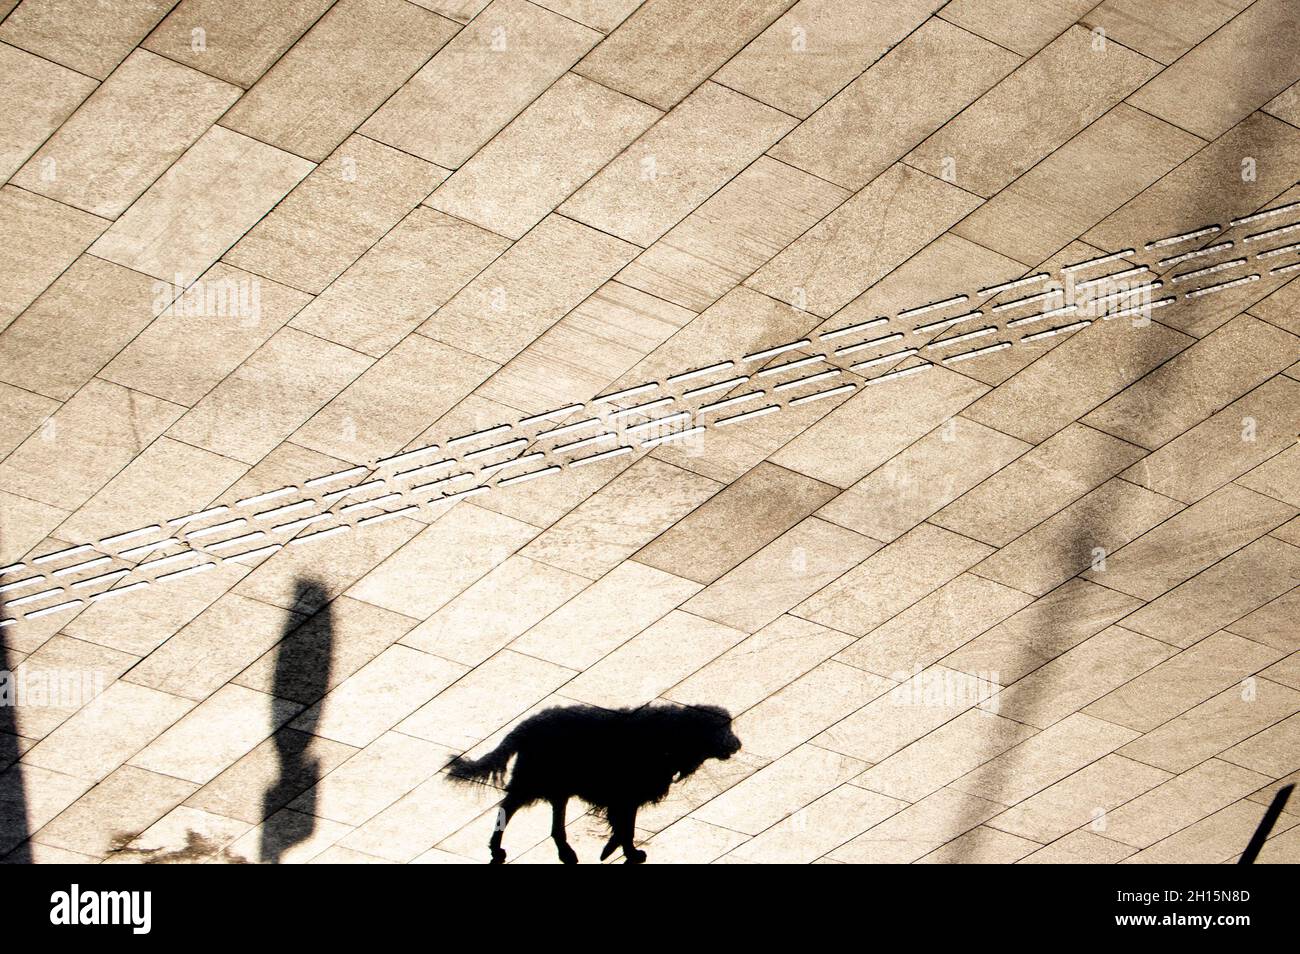 Tactile floor paving indicator tiles and shadow silhouette of a dog walking alone on city street in sepia black and white Stock Photo